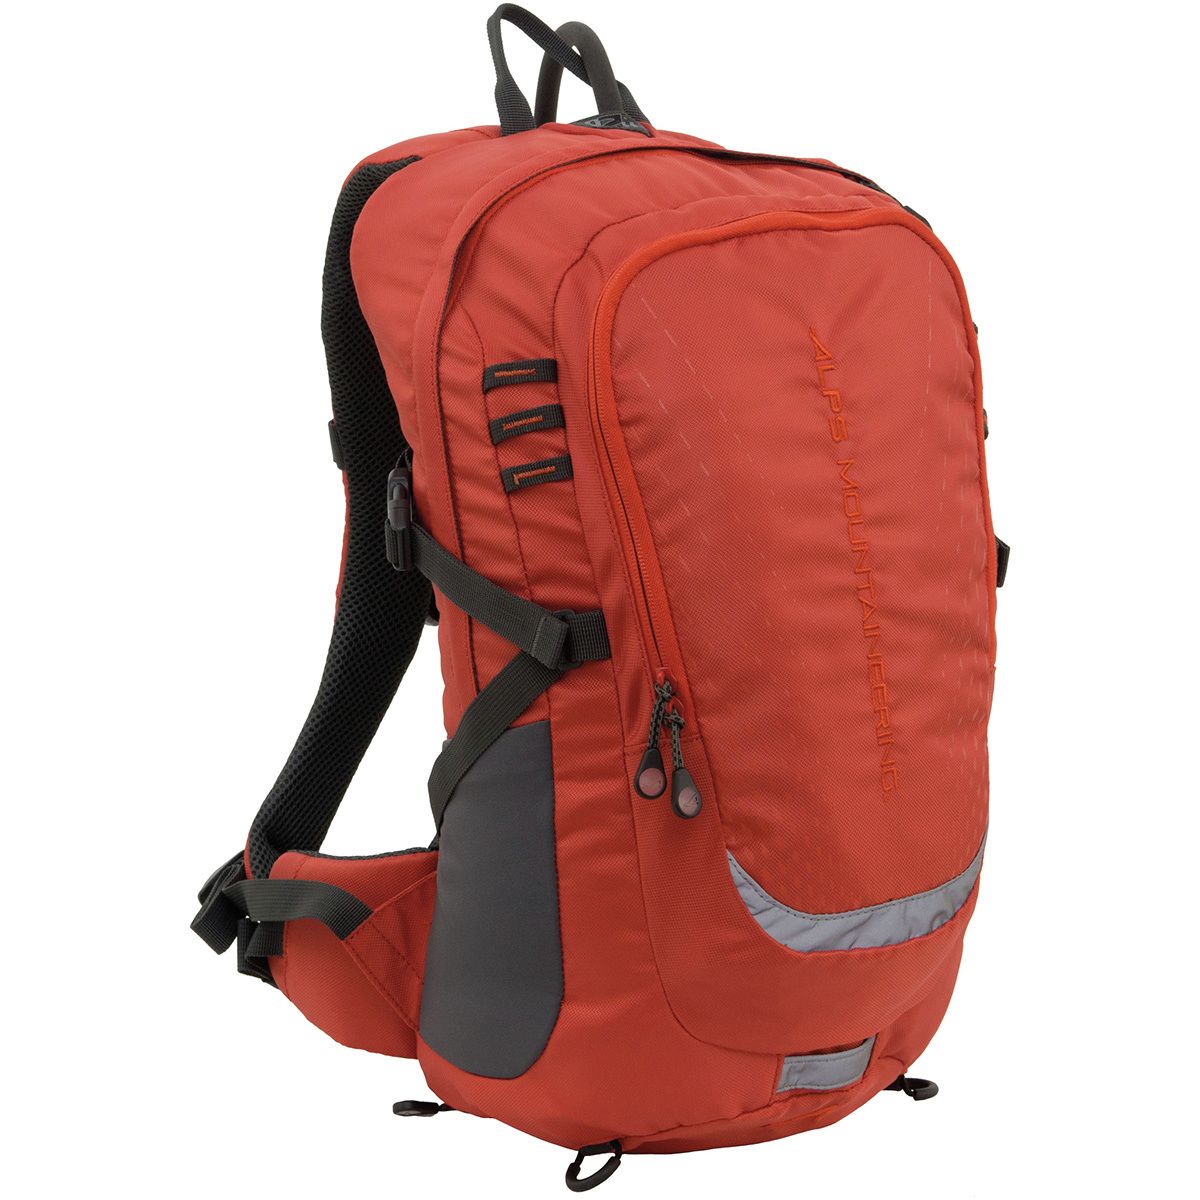 ALPS Mountaineering Hydro Trail 17L Backpack